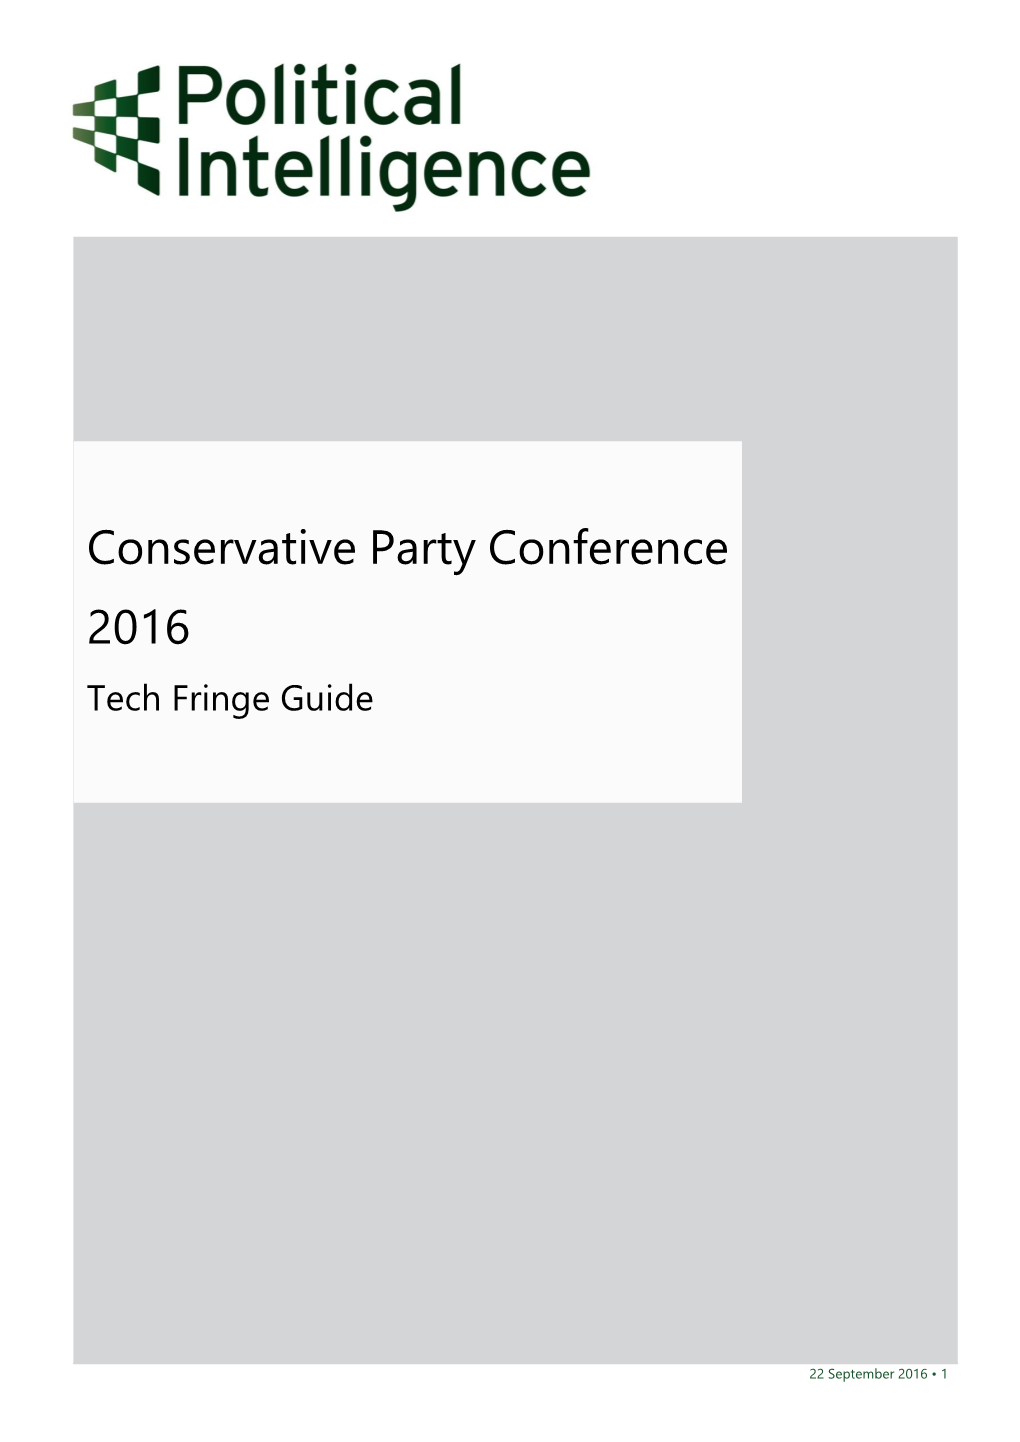 Conservative Party Conference 2016 Tech Fringe Guide